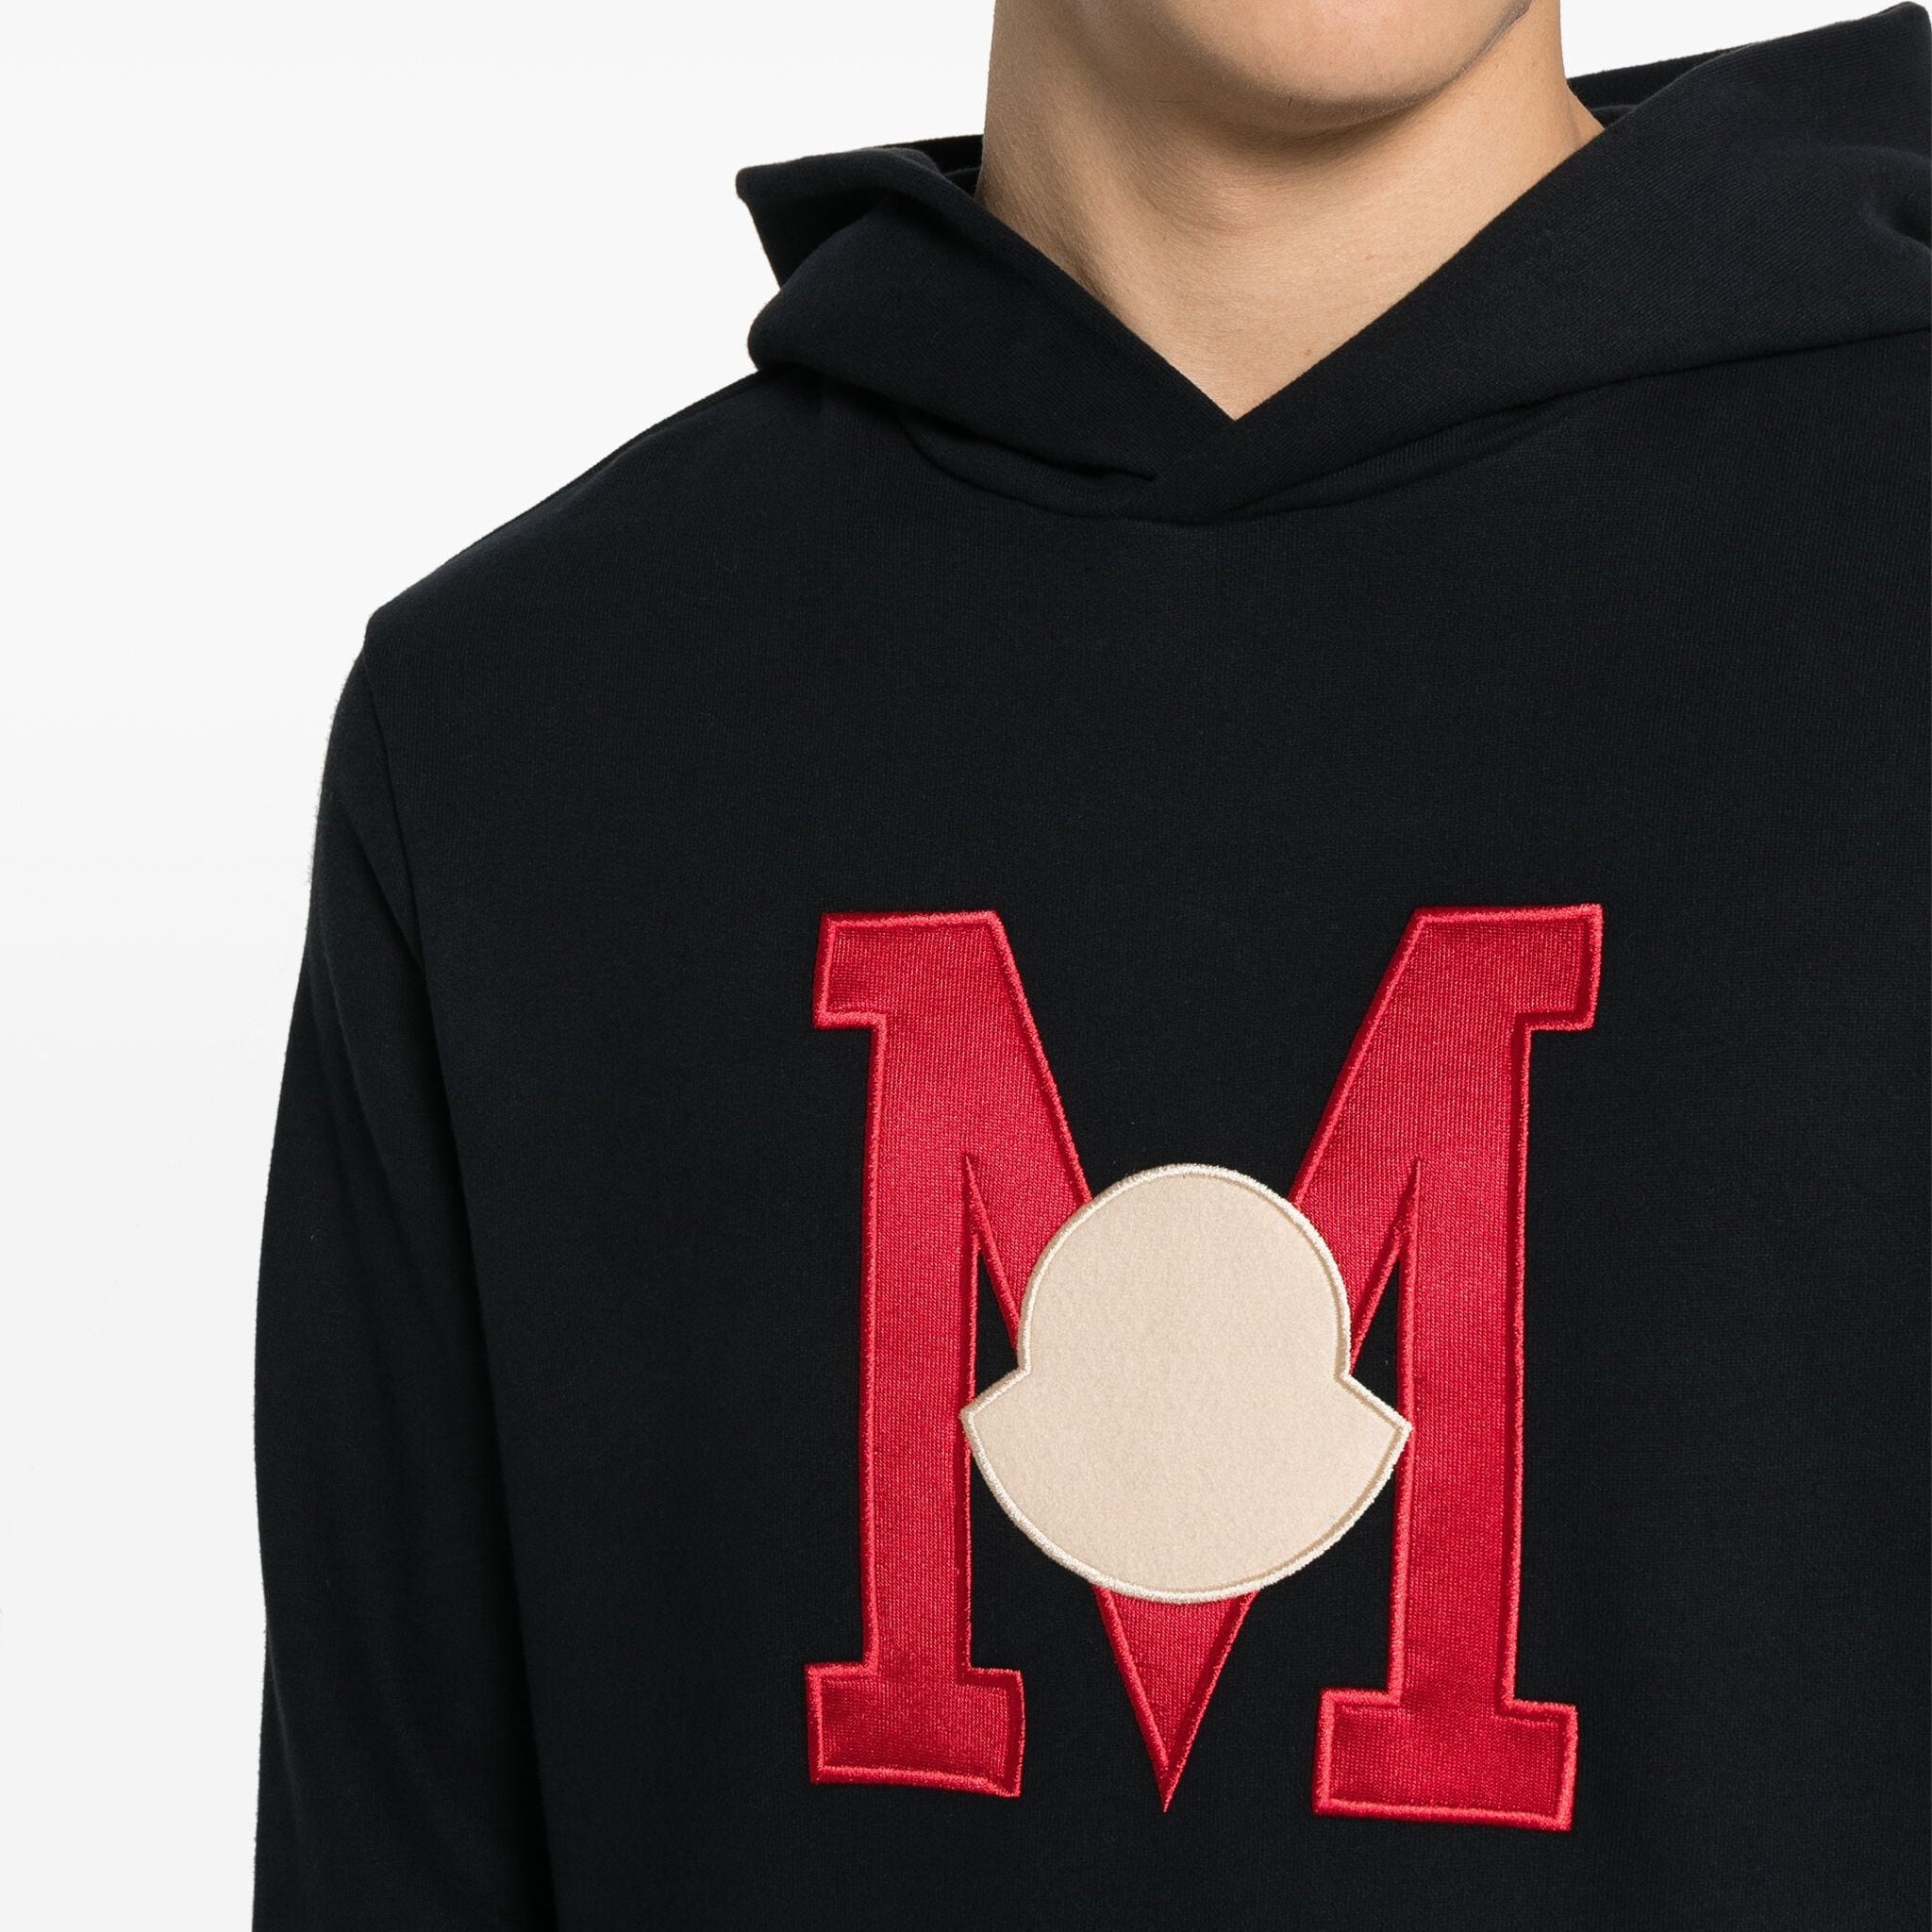 EMBROIDERED-LOGO COTTON HOODIE